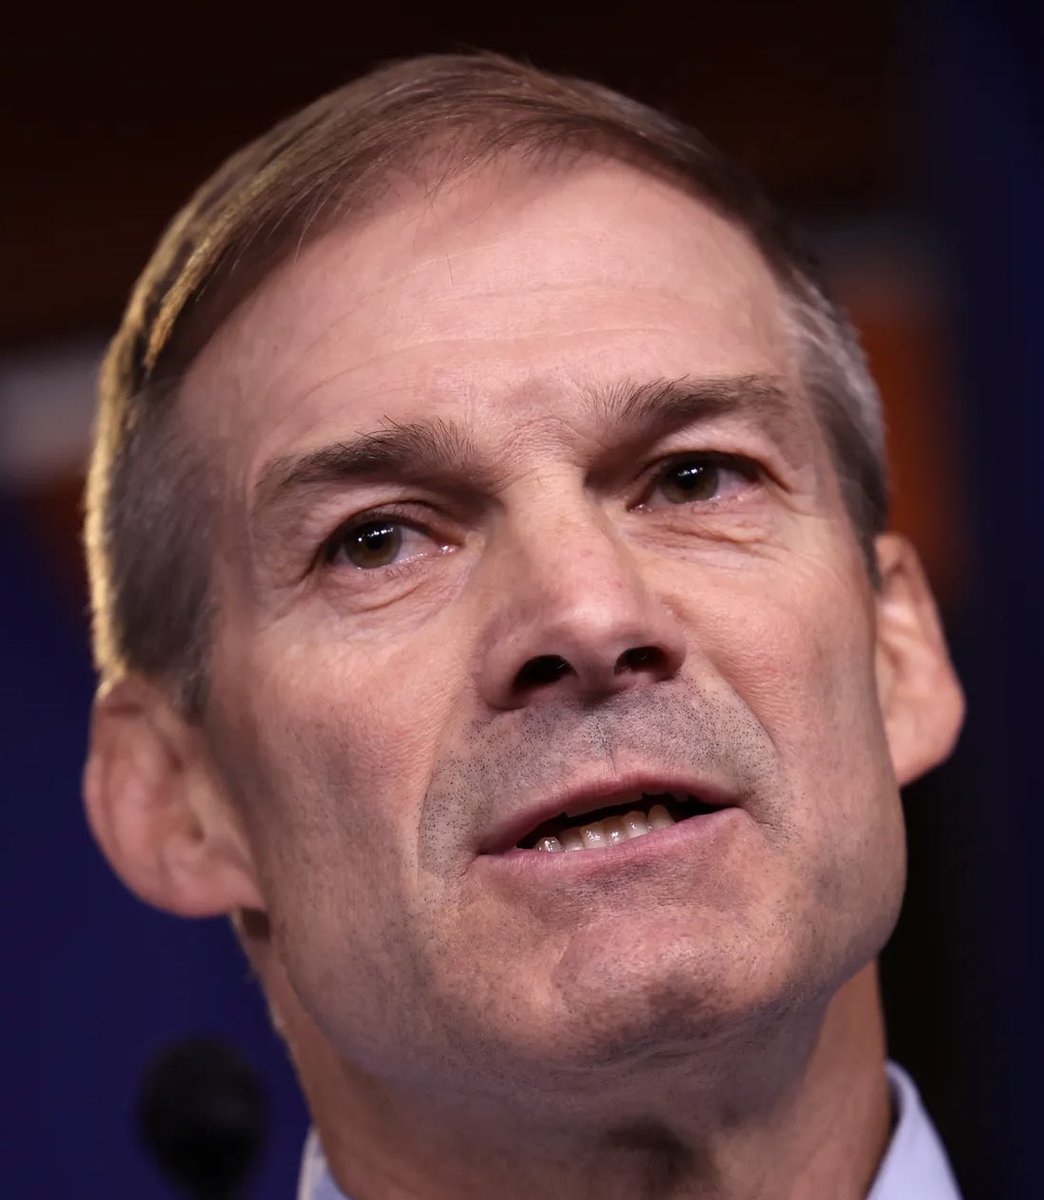 BREAKING: Republican House Speaker candidate Jim Jordan is hit with devastating news as NBC News drops bombshell, reveals that “four of the former Ohio State University wrestlers who have accused Jordan of failing to protect them from a sexual predator when he was the team’s…